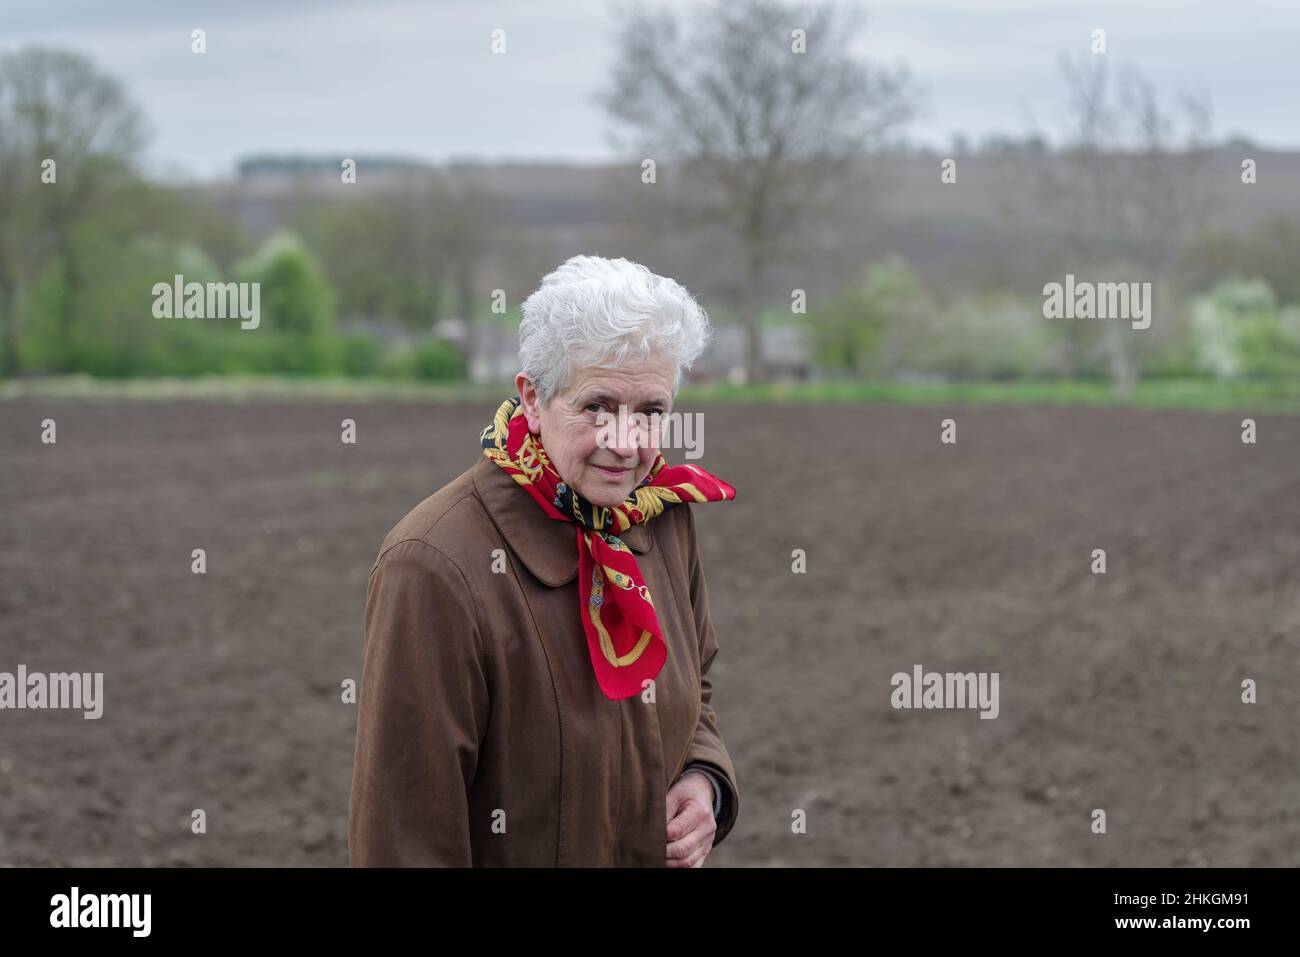 Senior woman standing outdoor in rural setting Stock Photo